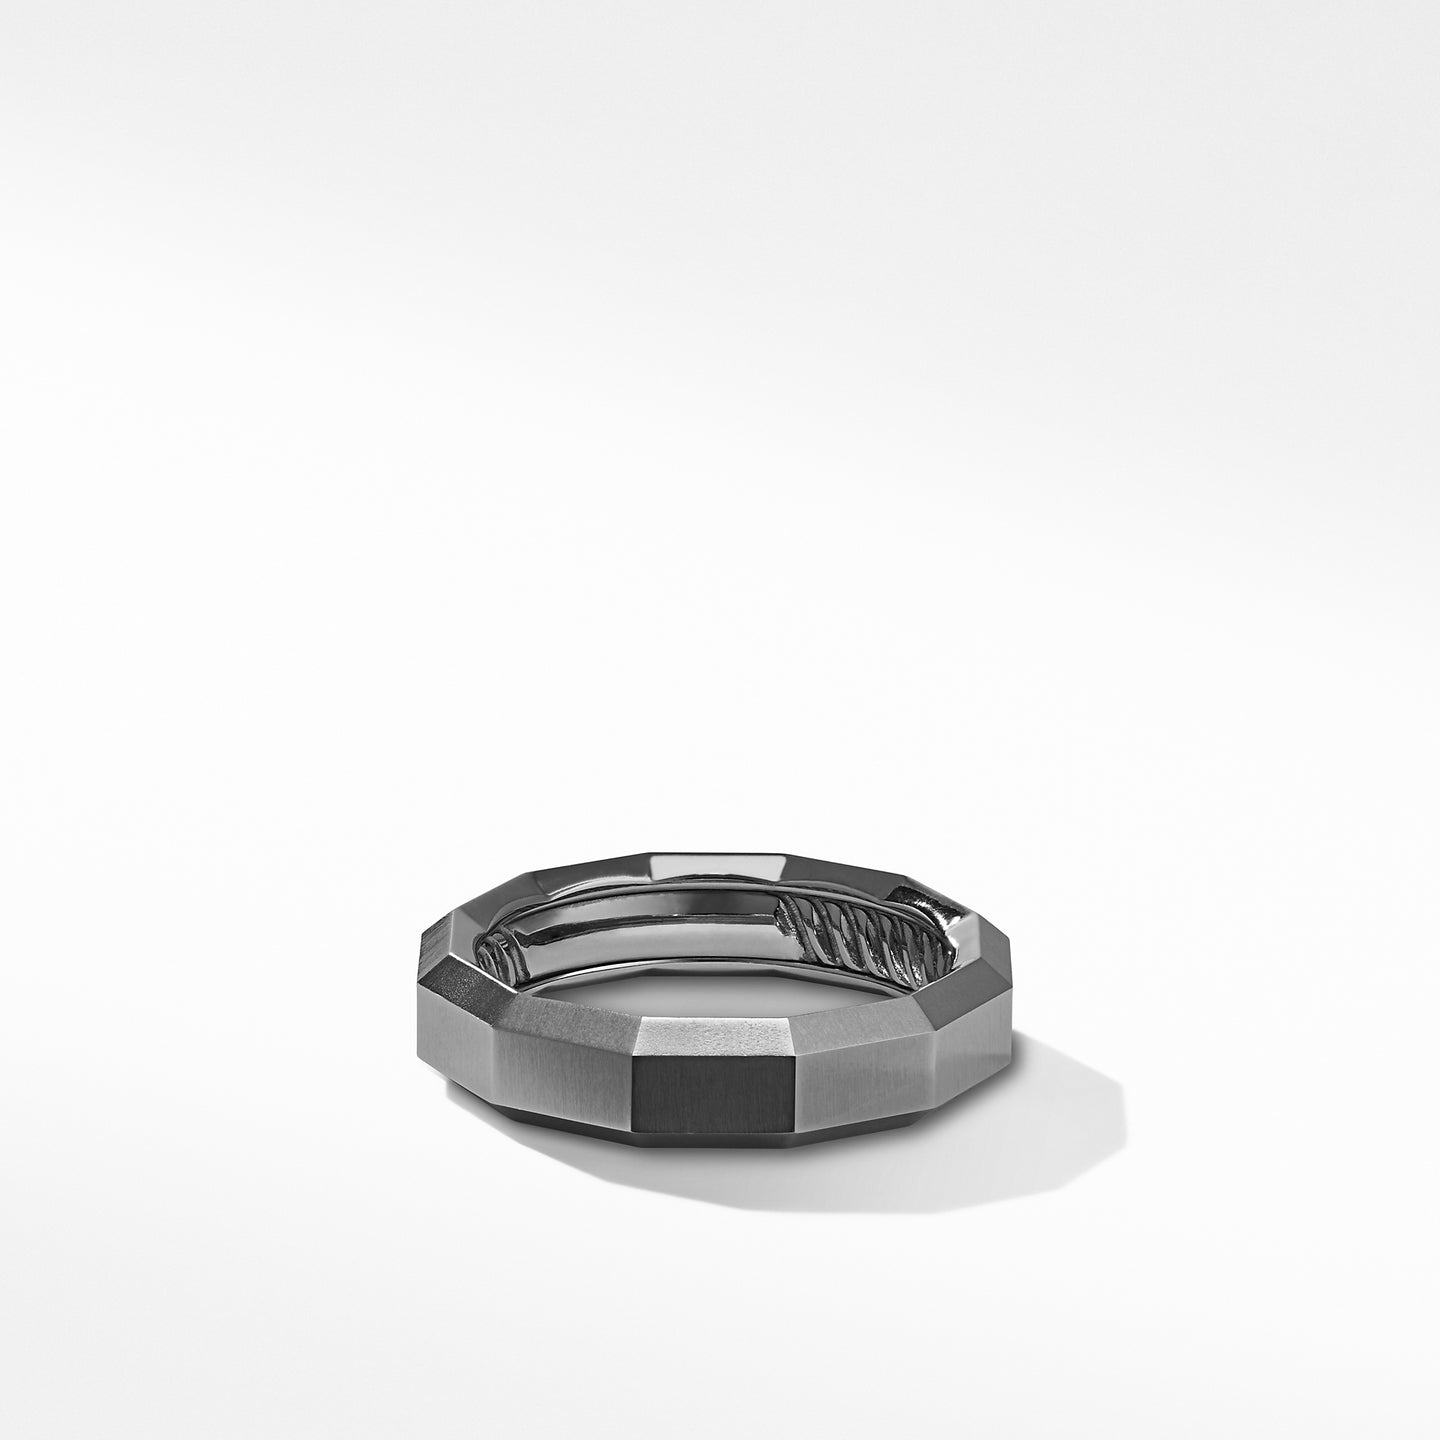 Faceted Band Ring in Grey Titanium, Size 11